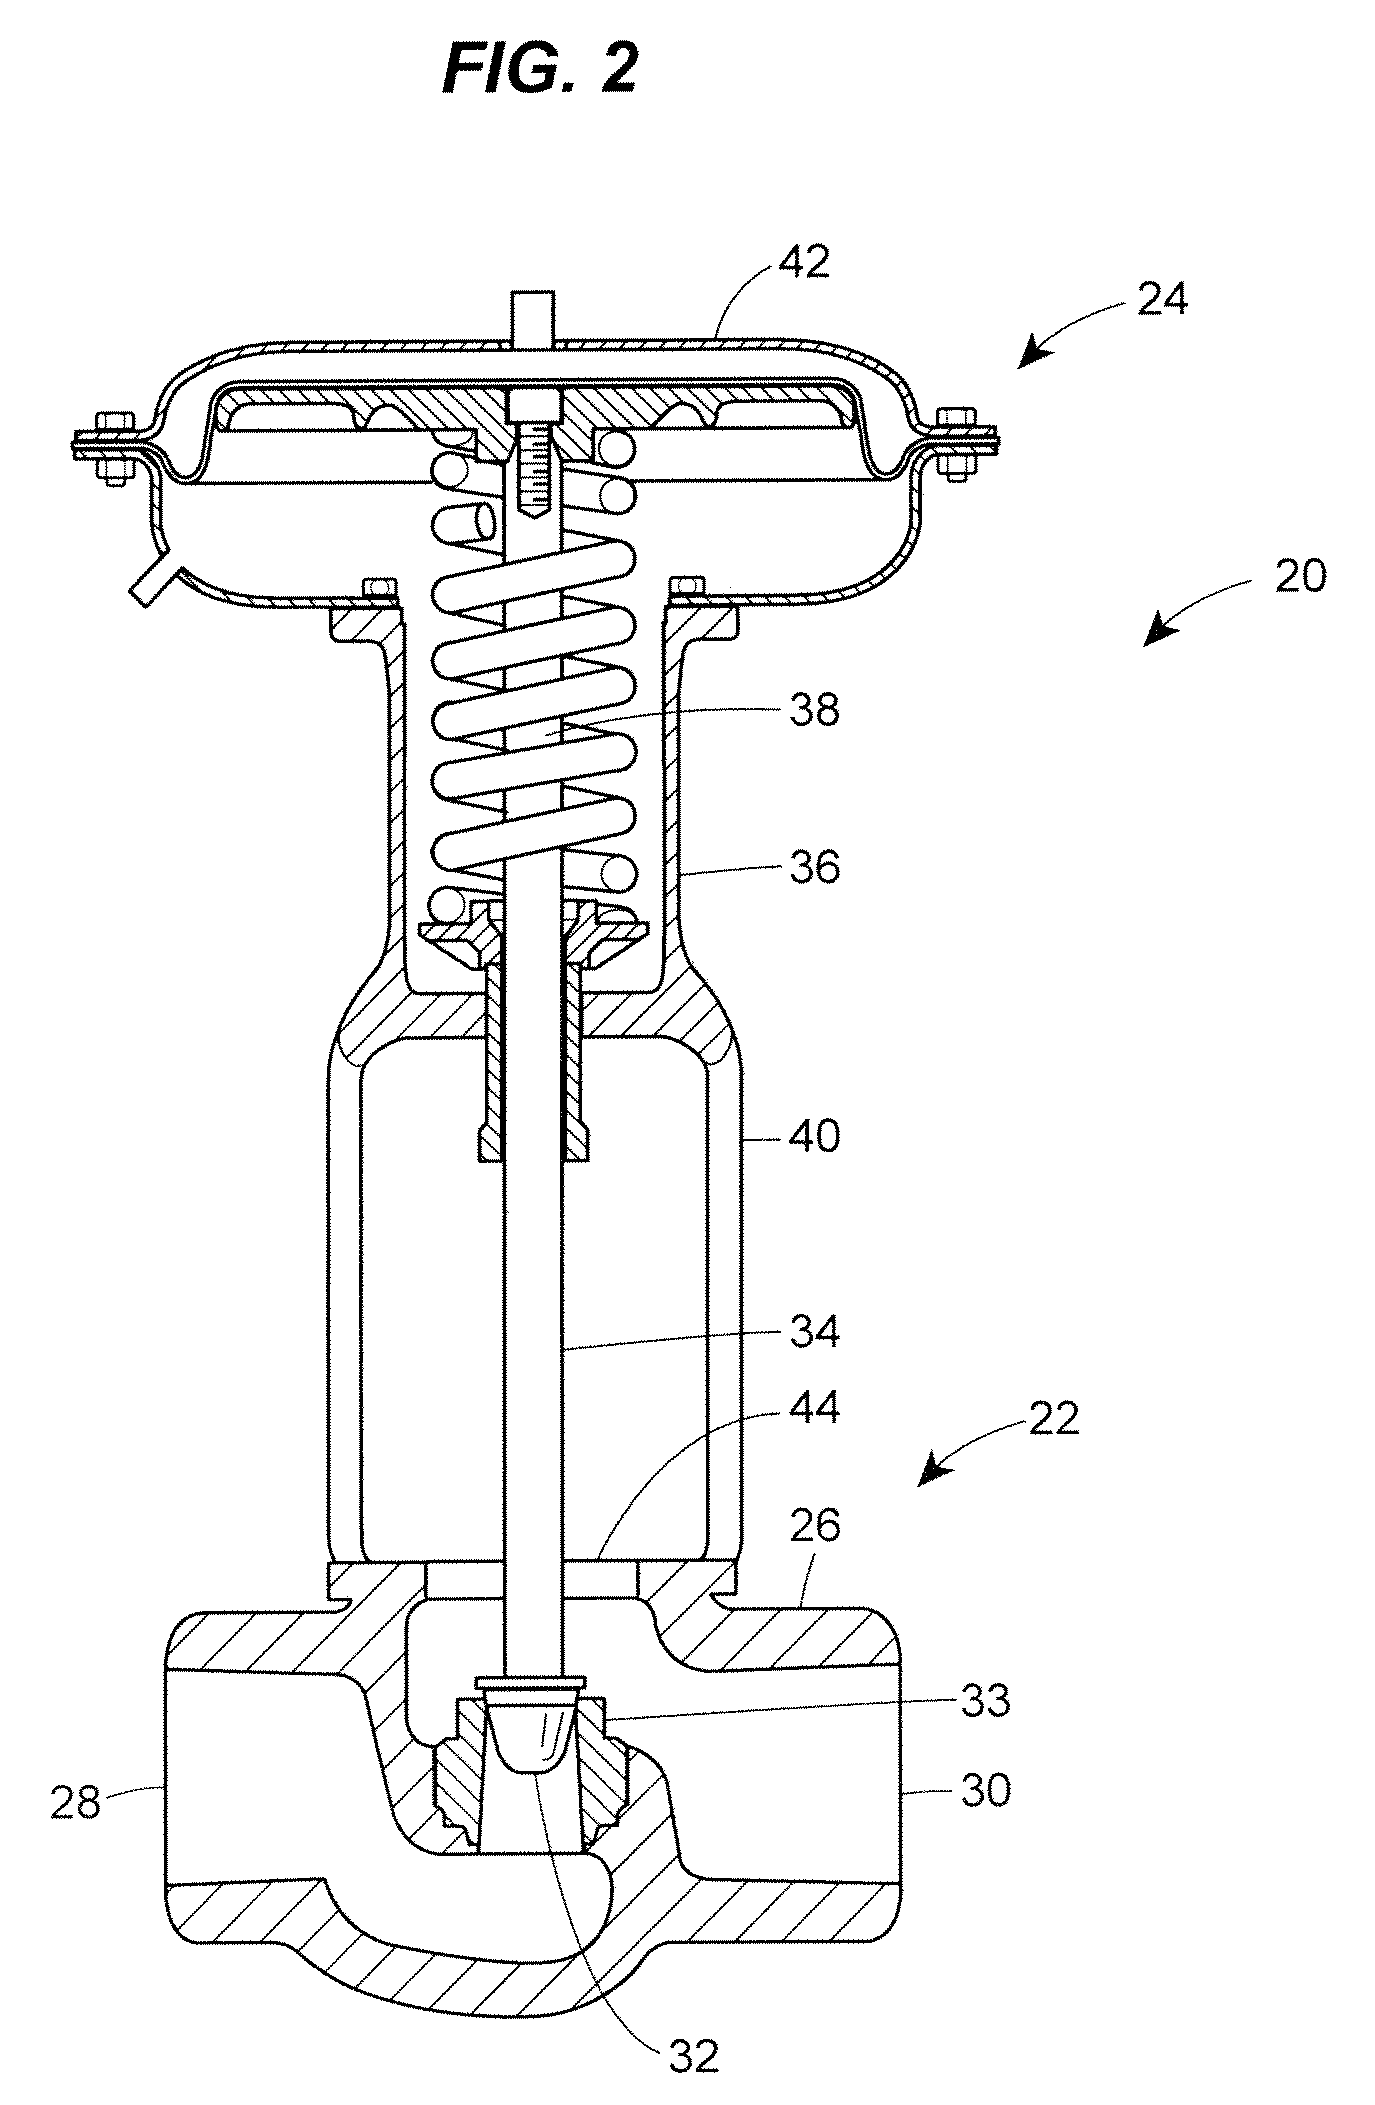 Device and Method for Determining a Failure Mode of a Pneumatic Control Valve Assembly